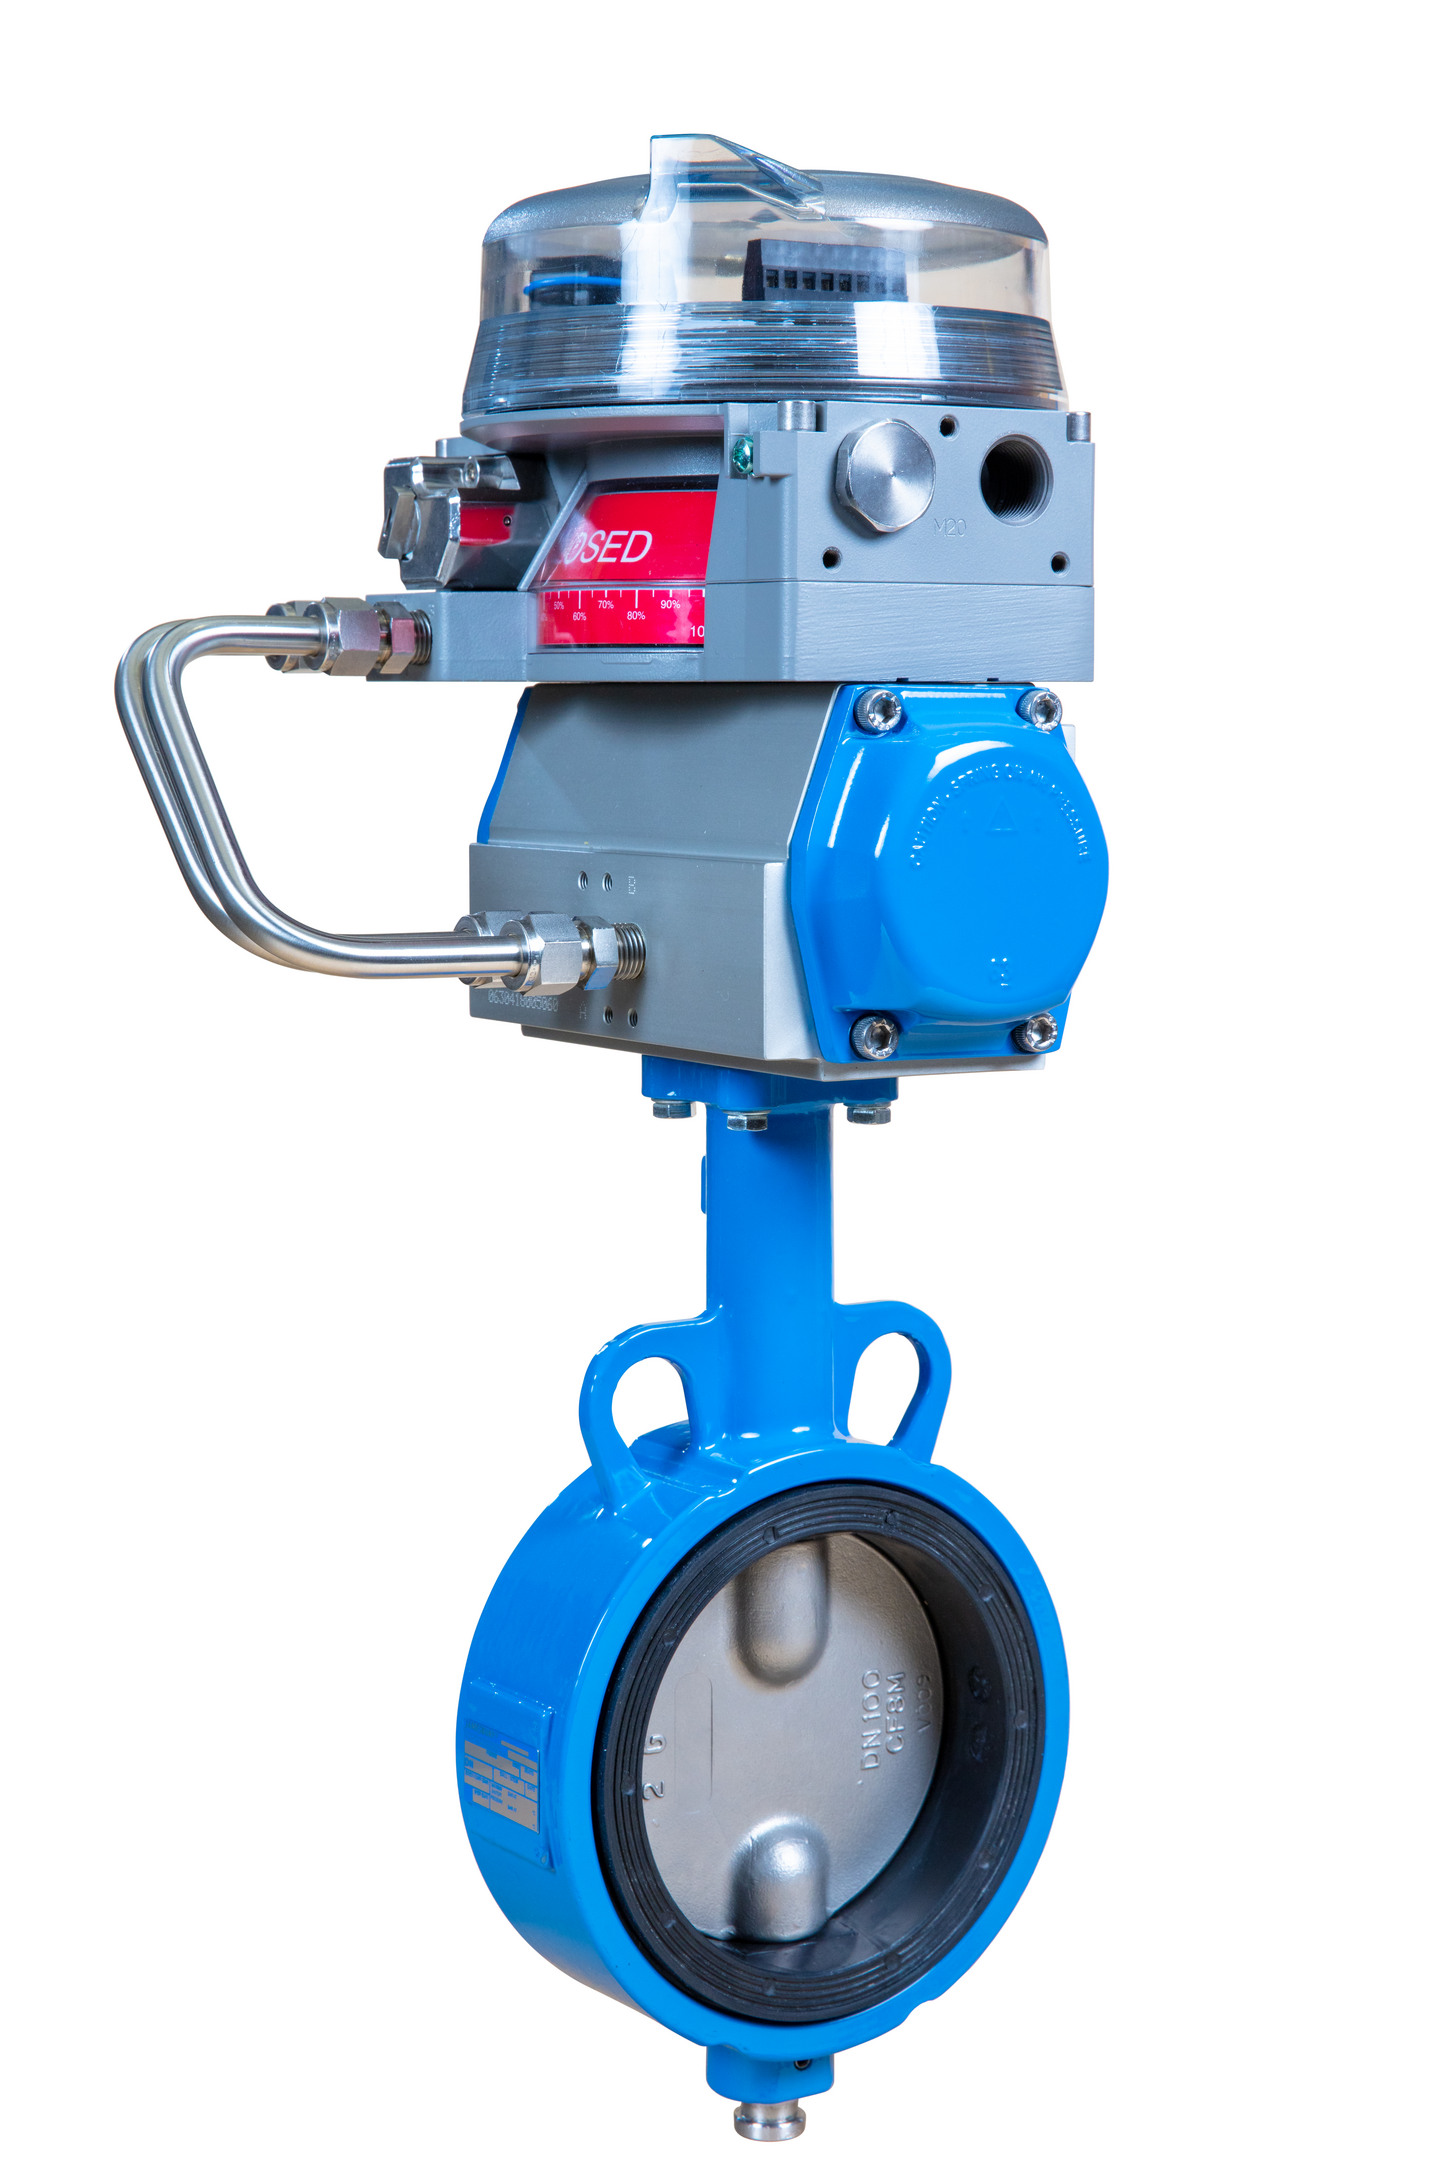 Jamesbury EasyFlow JA series concentric disc resilient seated butterfl y valve with Neles VPVL rack and pinion actuator and Axiom on-off valve controller.